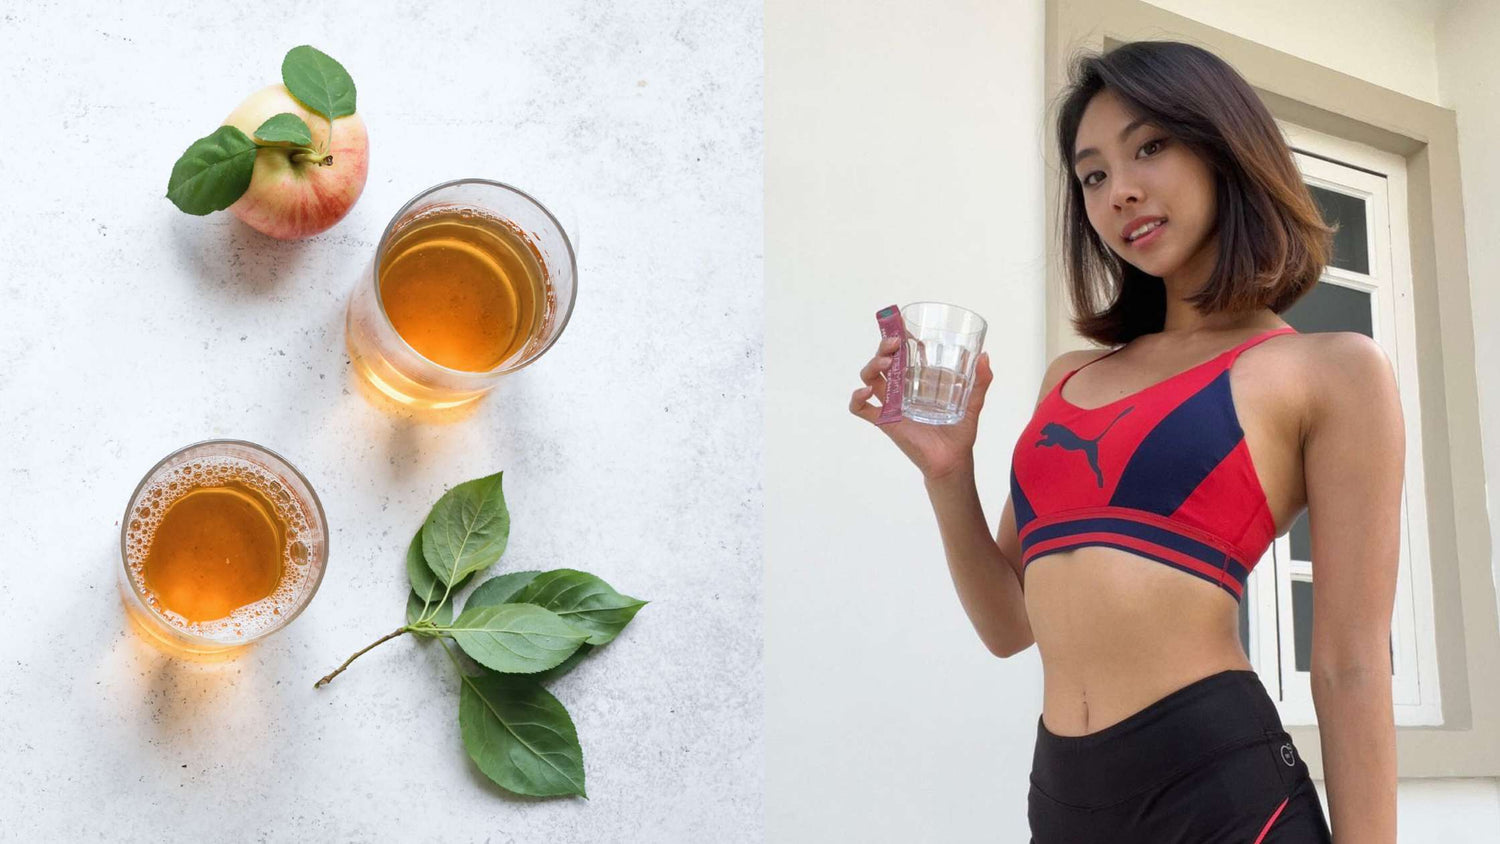 Apple cider vinegar shots for weight loss and a model holding a glass of water and Super Lean Shots.